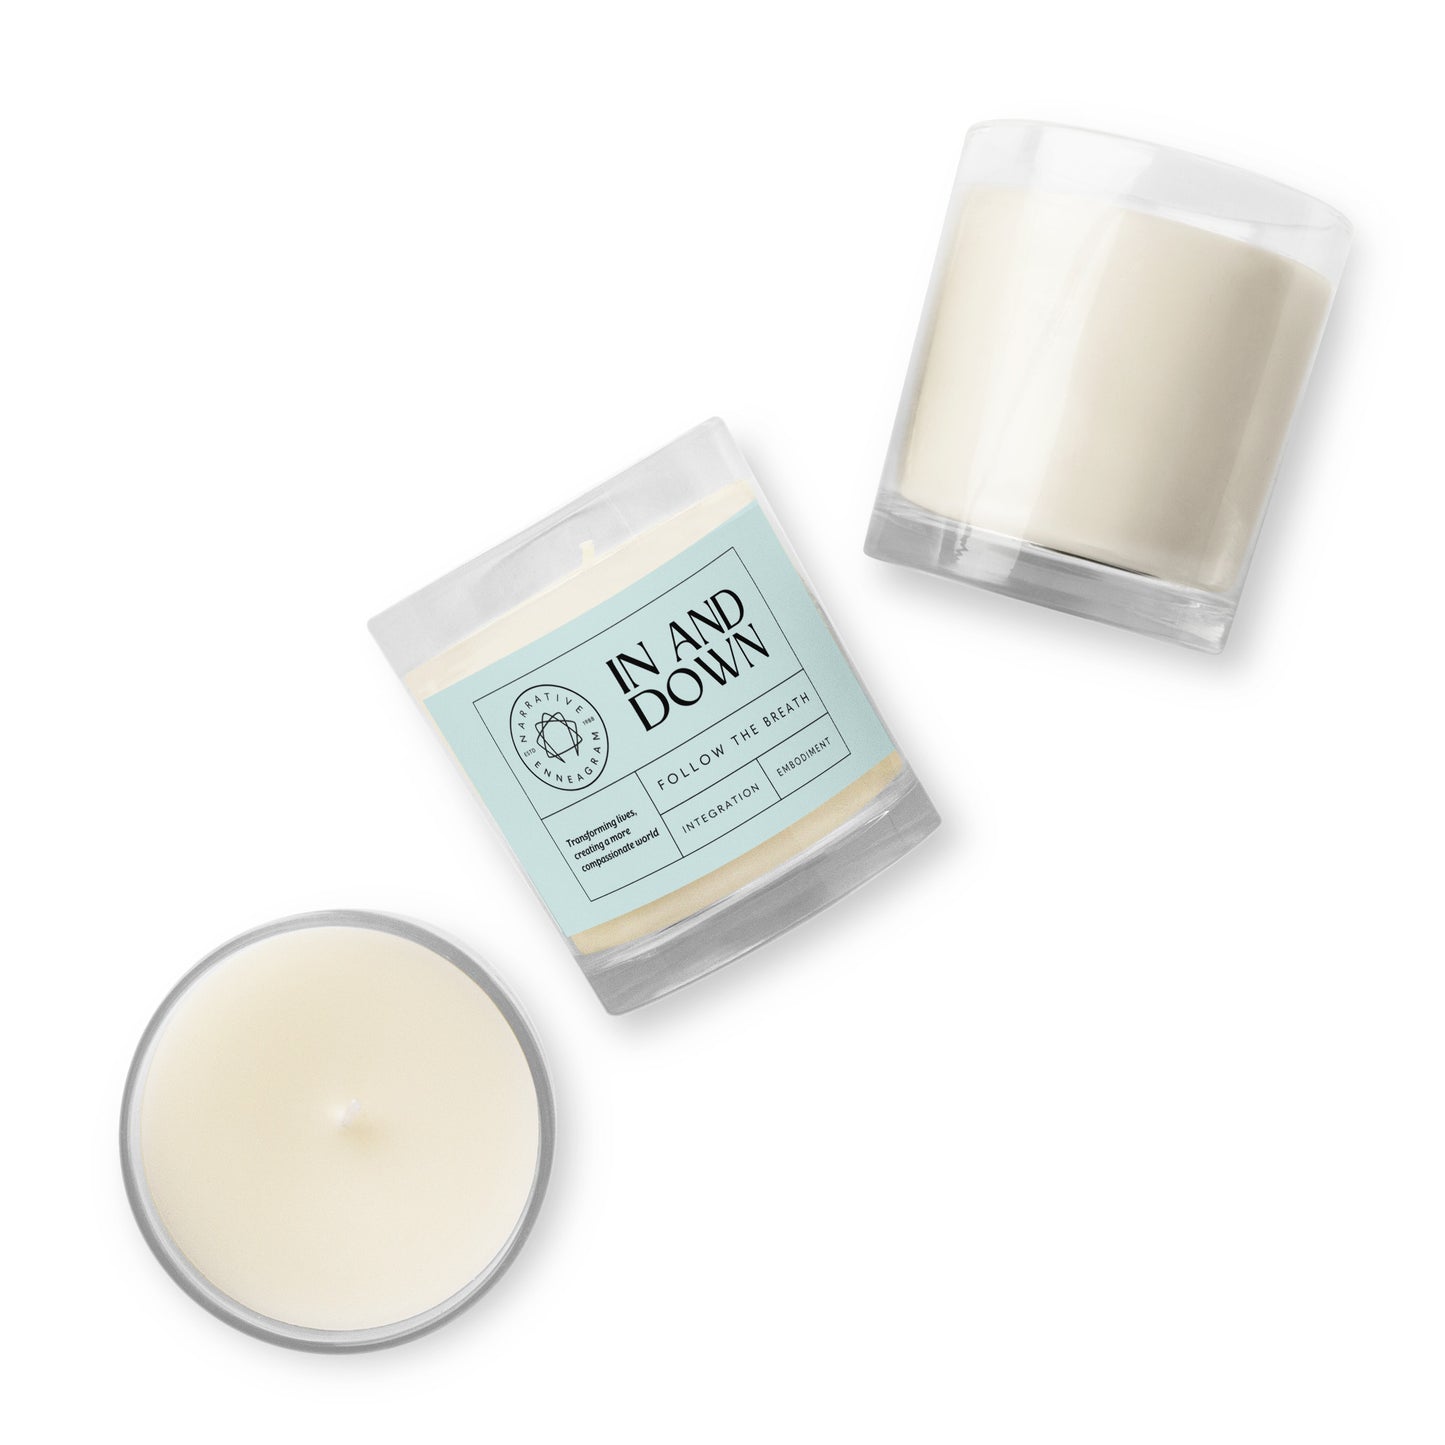 In & Down (Glass jar soy wax candle)